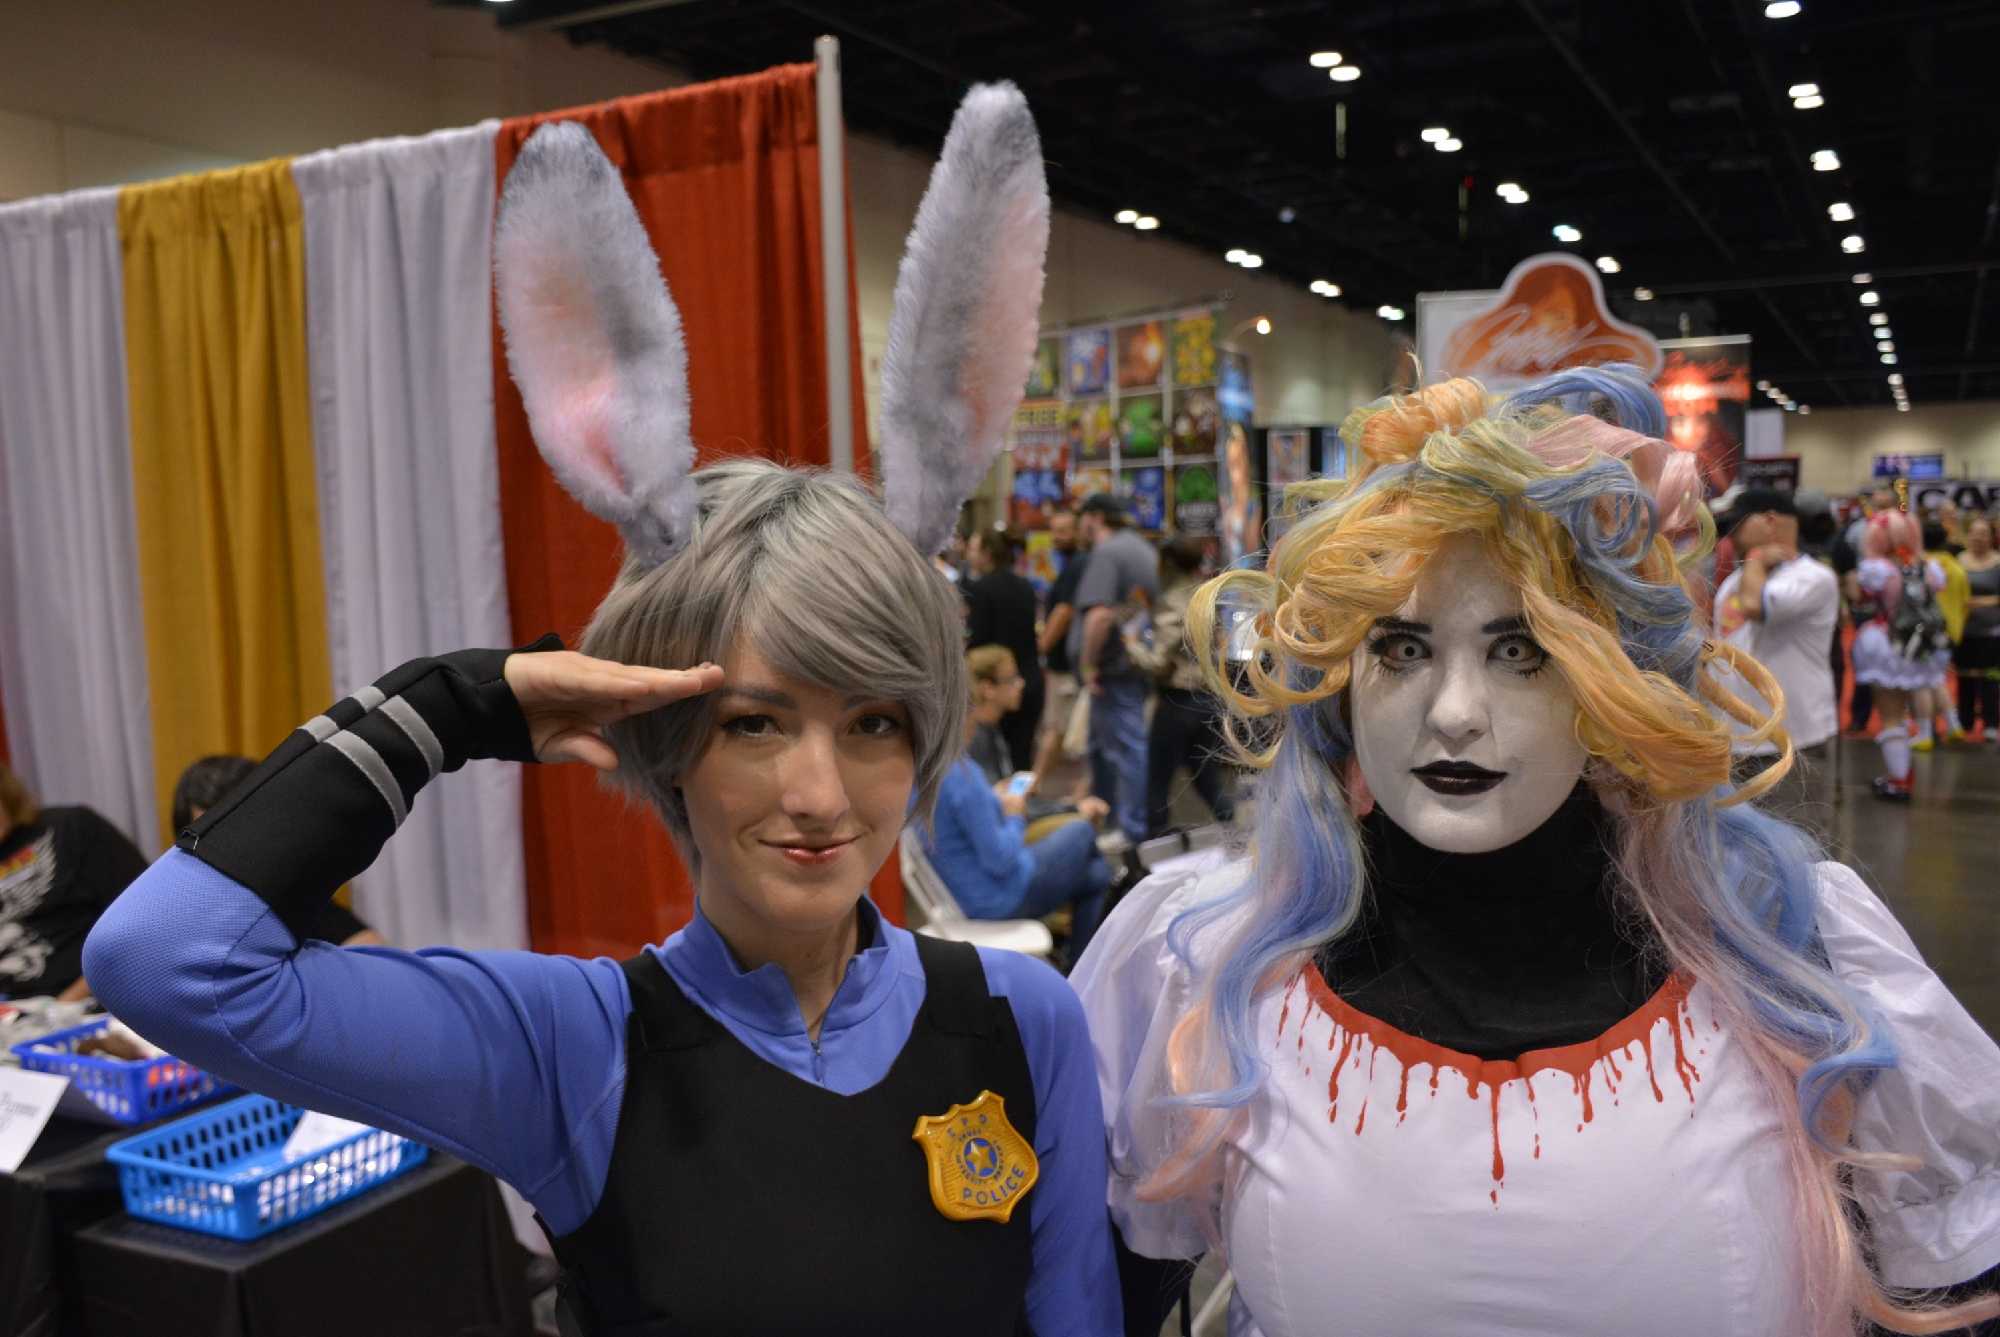 Anime Expo Playing dress up with 125000 friends  Orange County Register